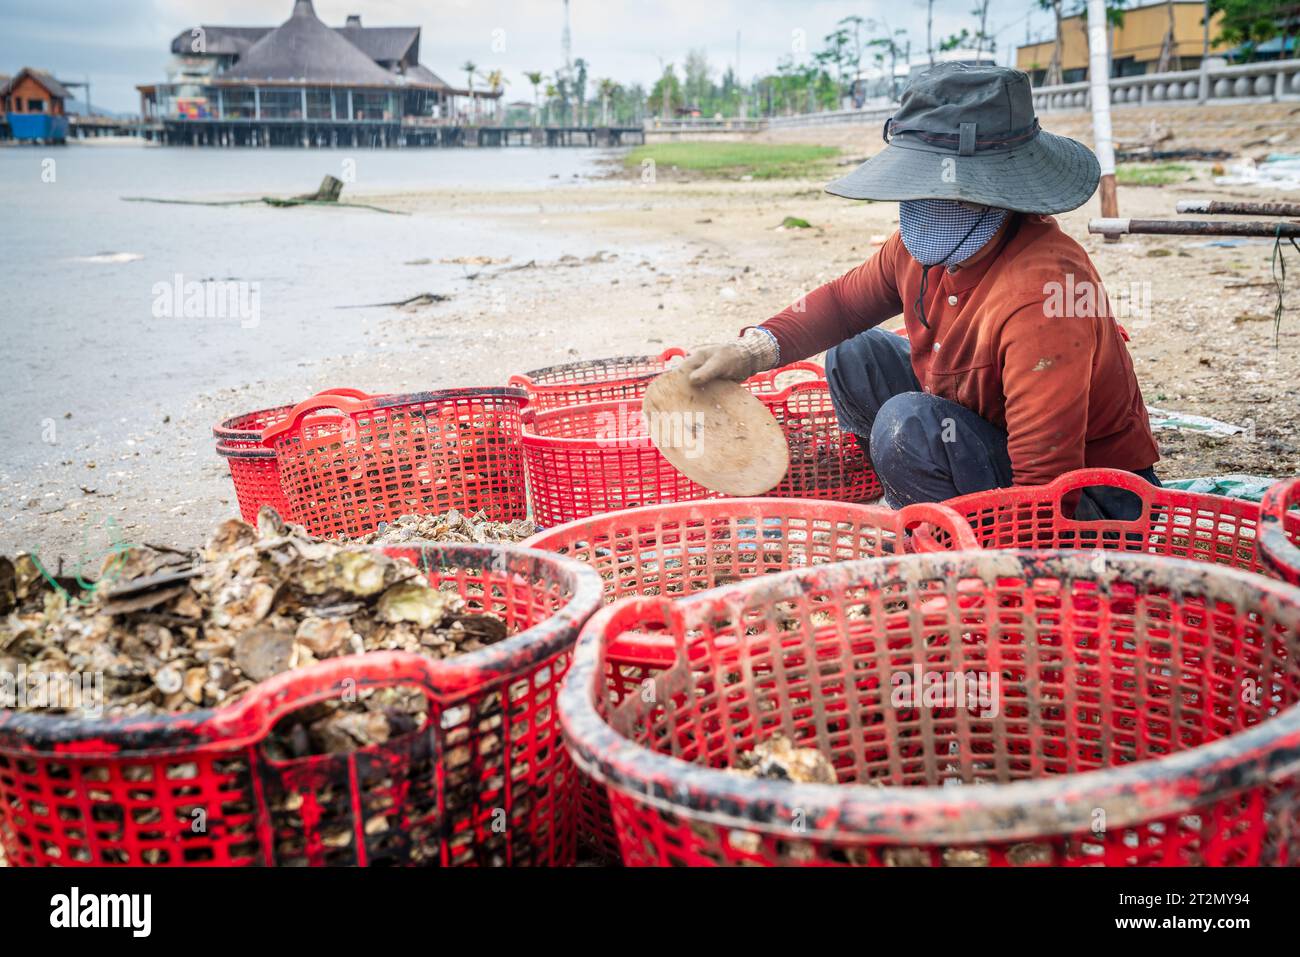 Central Vietnam, November 19, 2022: Fisherman is sorting morning catch of clams on the shore of the Tam Giang–Cau Hai lagoon in Central Vietnam Stock Photo